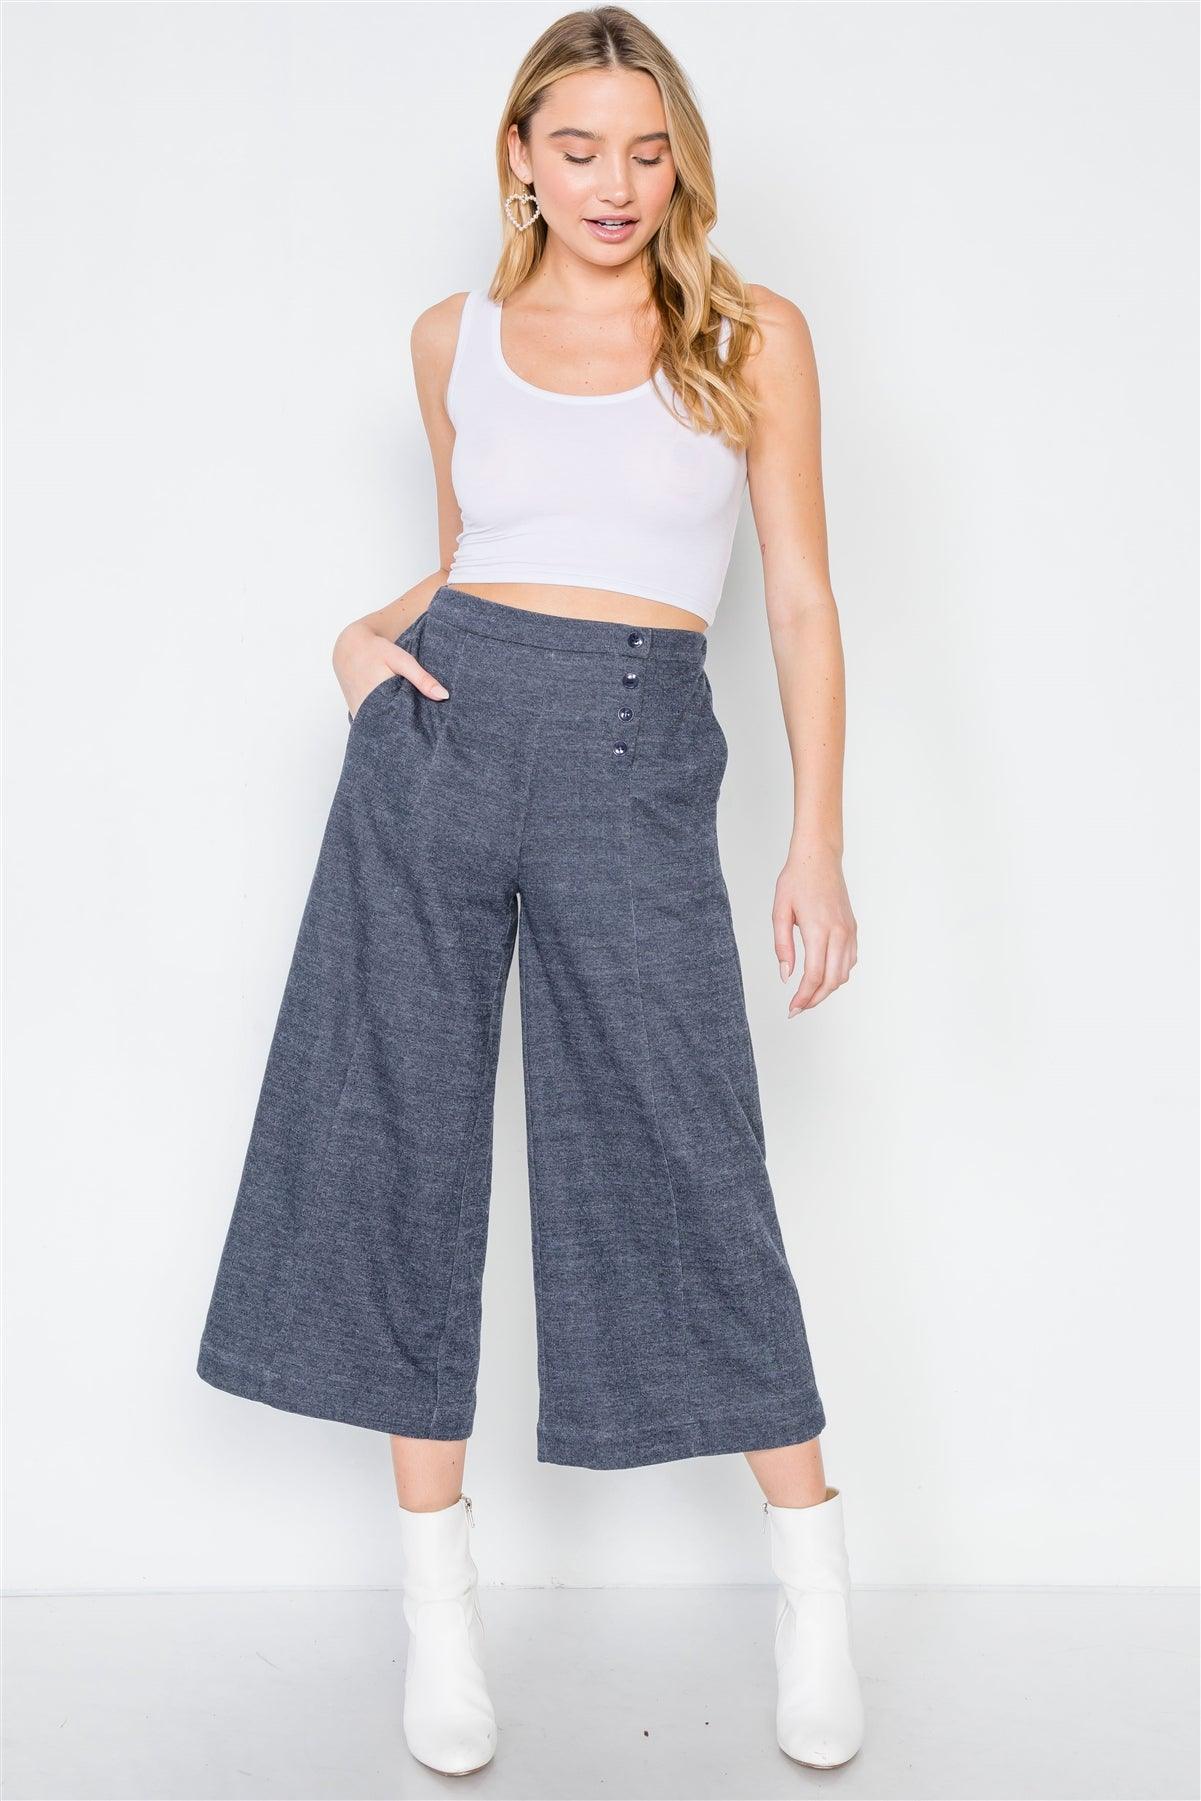 Navy Knit Side Button Wide Leg Ankle Pants /2-2-2